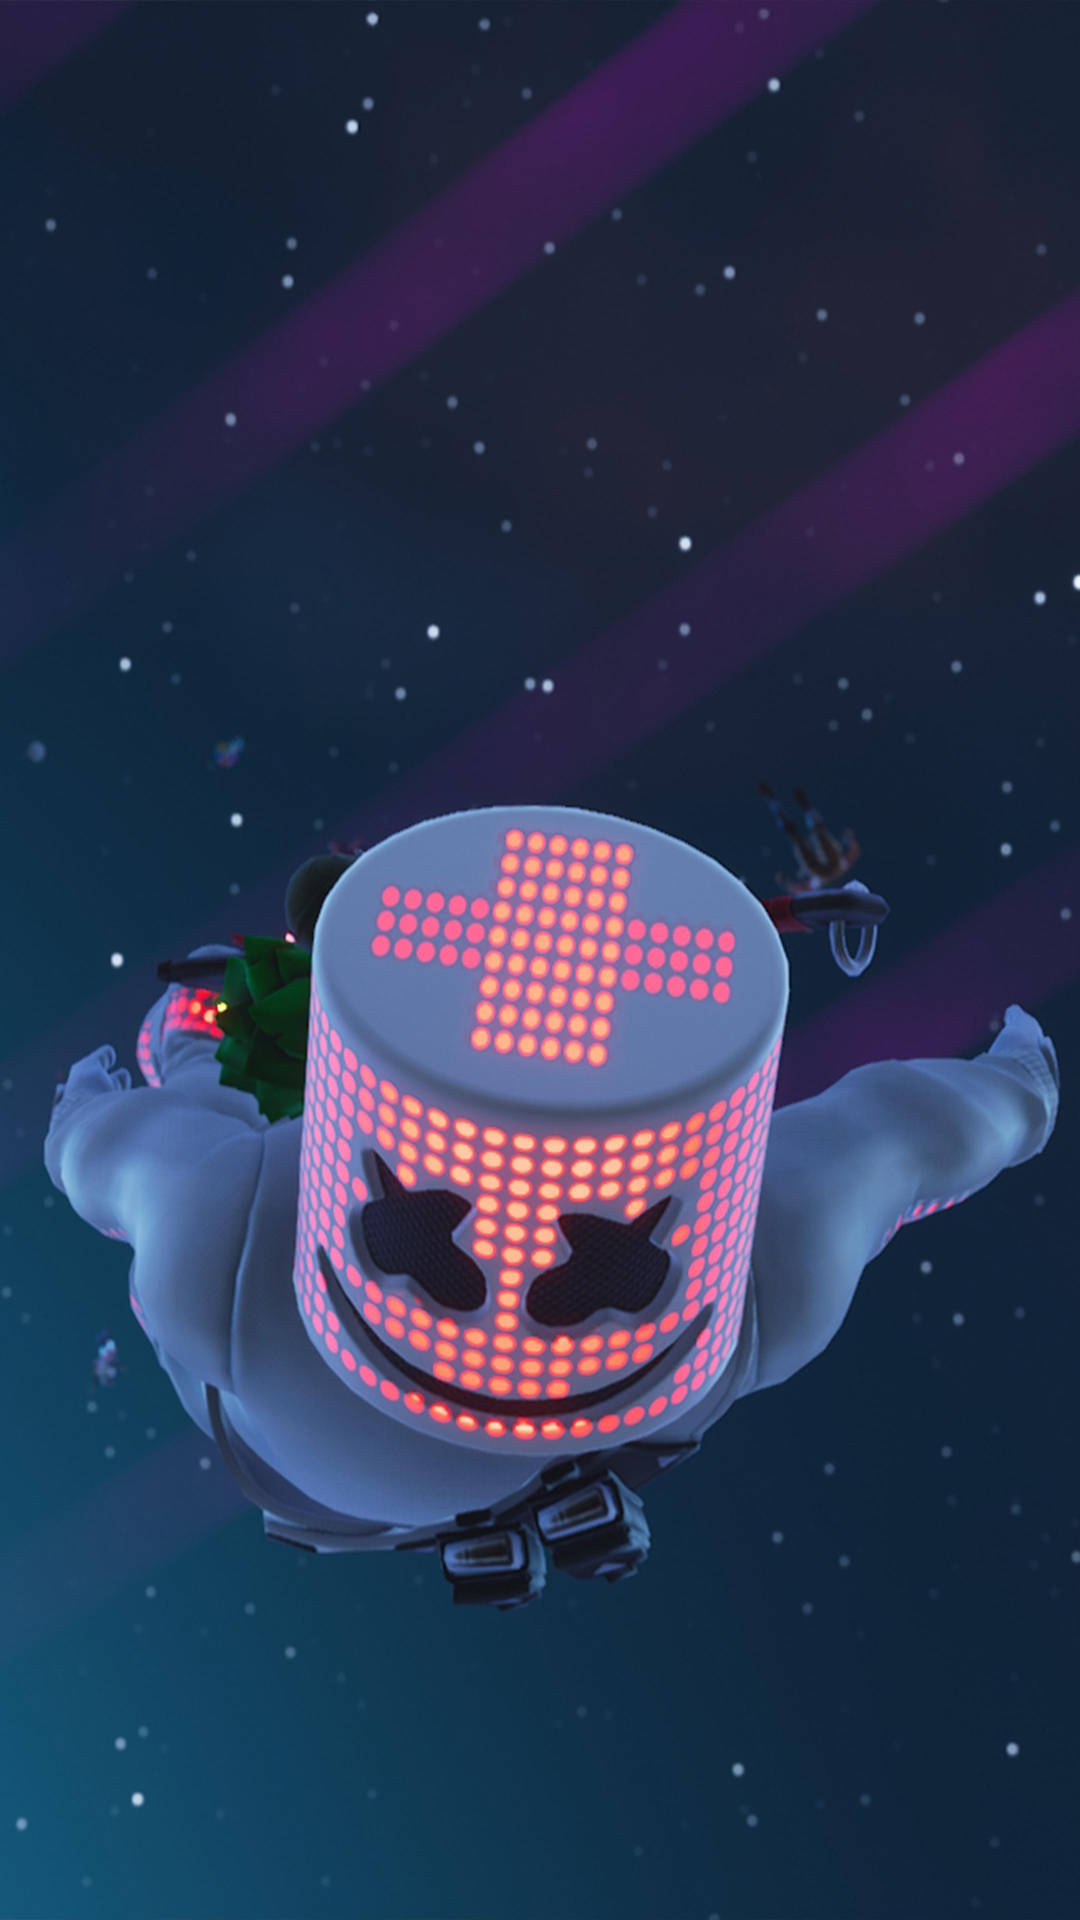 Marshmello Iphone In Space Wallpaper